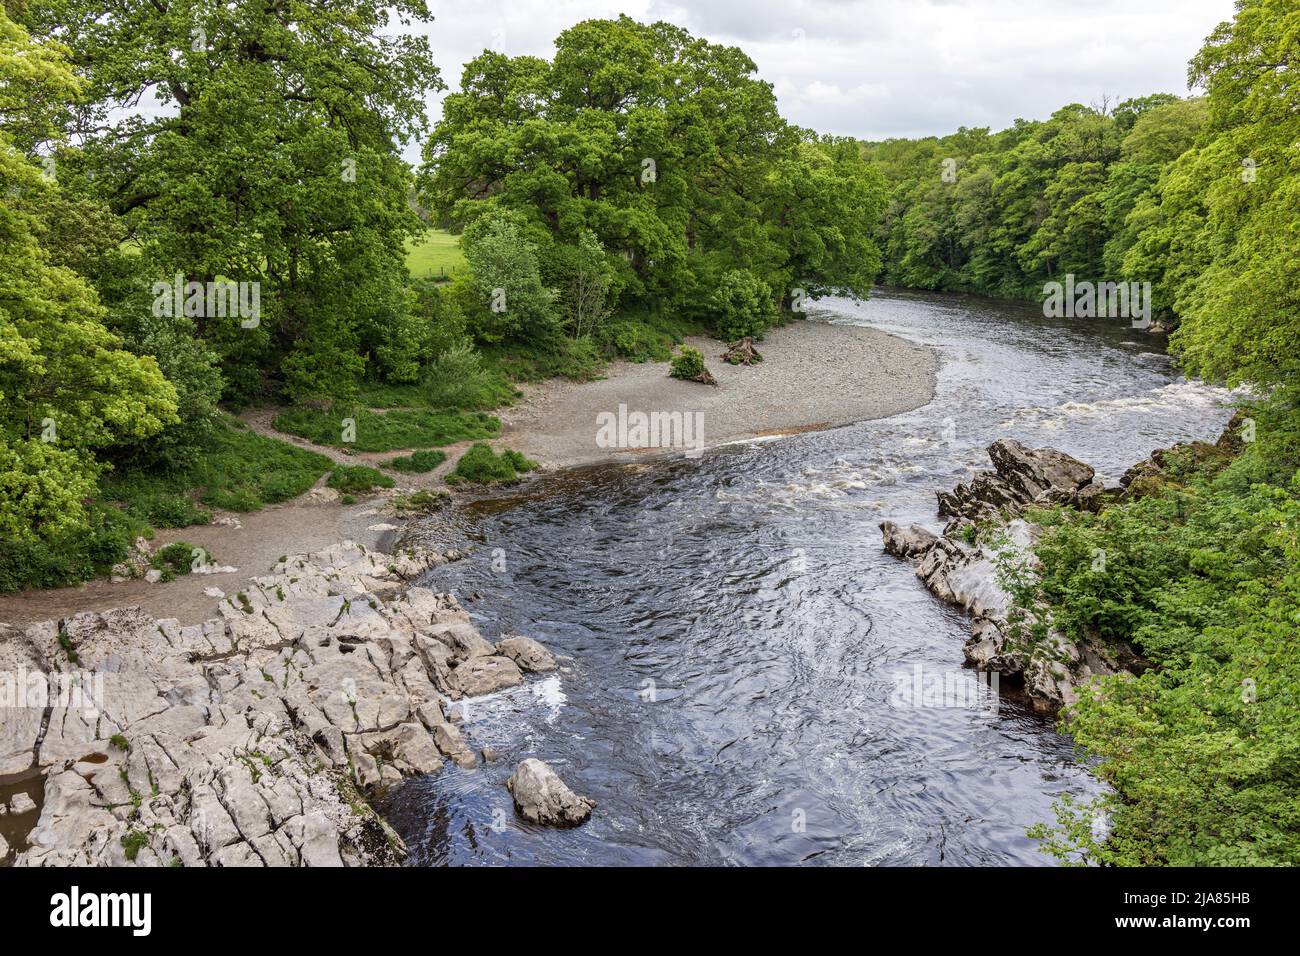 The River Lune from Devil's Bridge at Kirkby Lonsdale, Cumbria, England, Uk Stock Photo